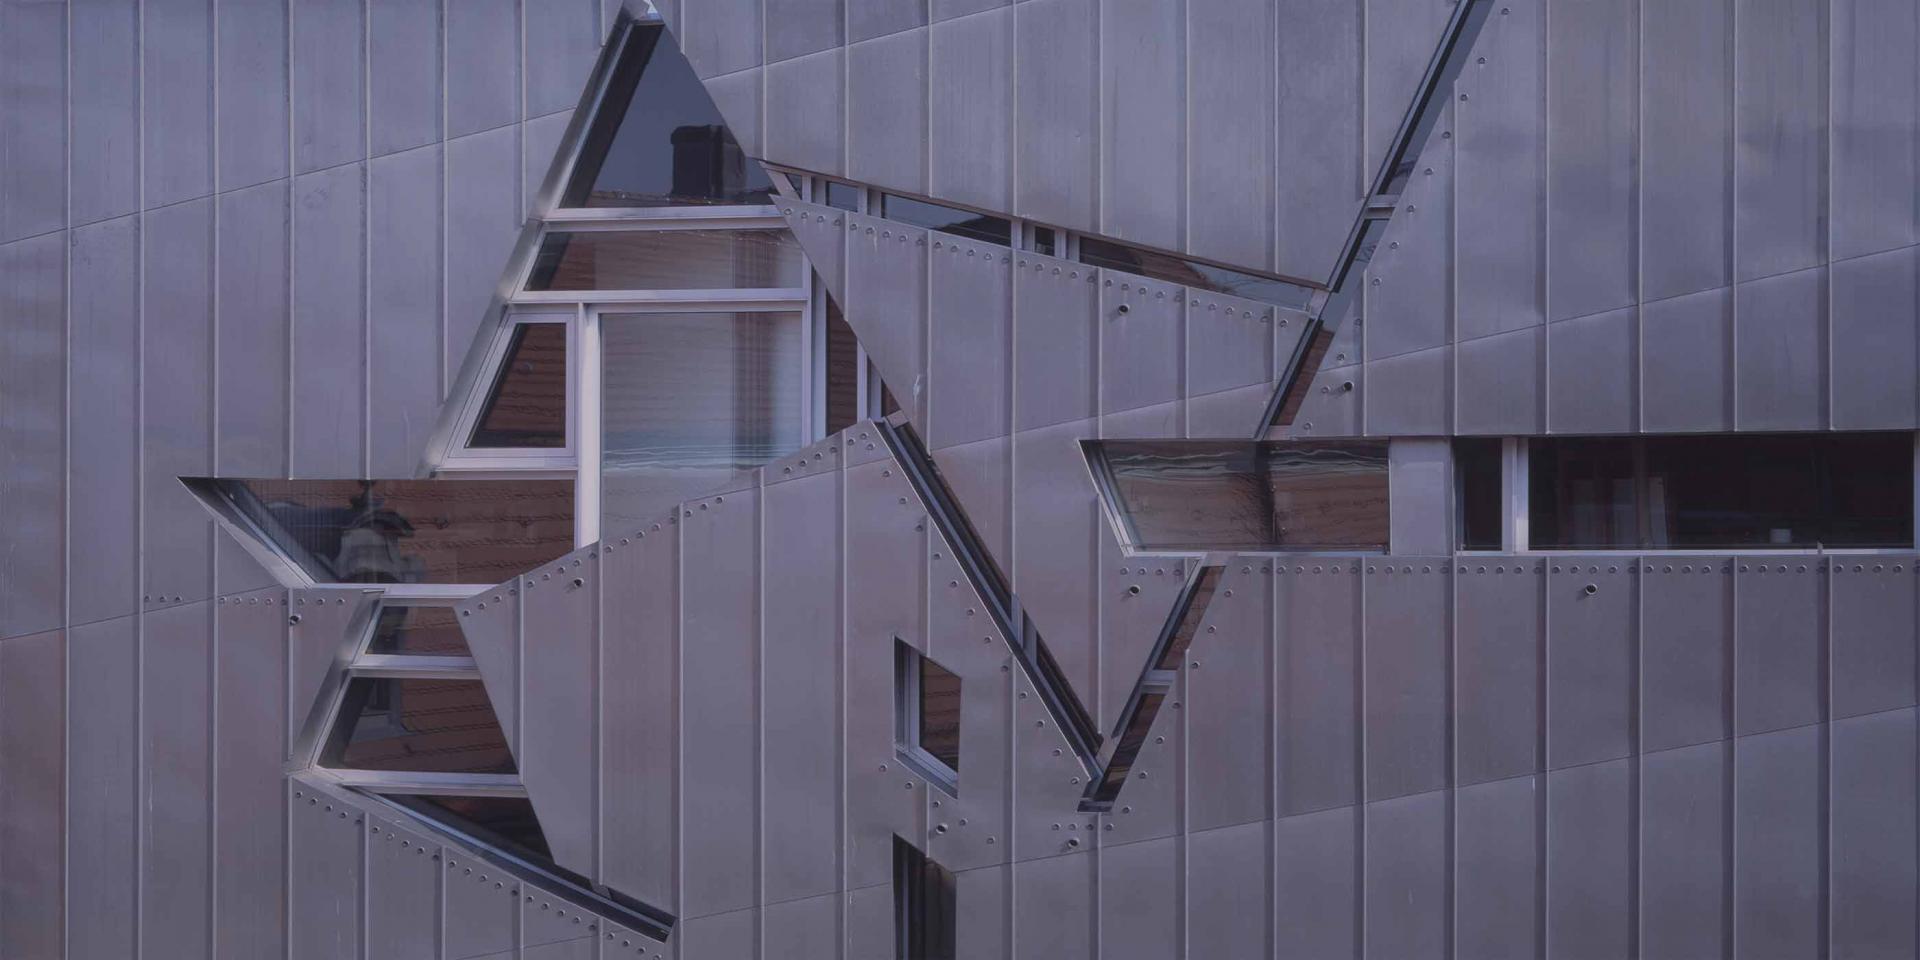 Detailed view of the zinc façade of the Libeskind building with windows